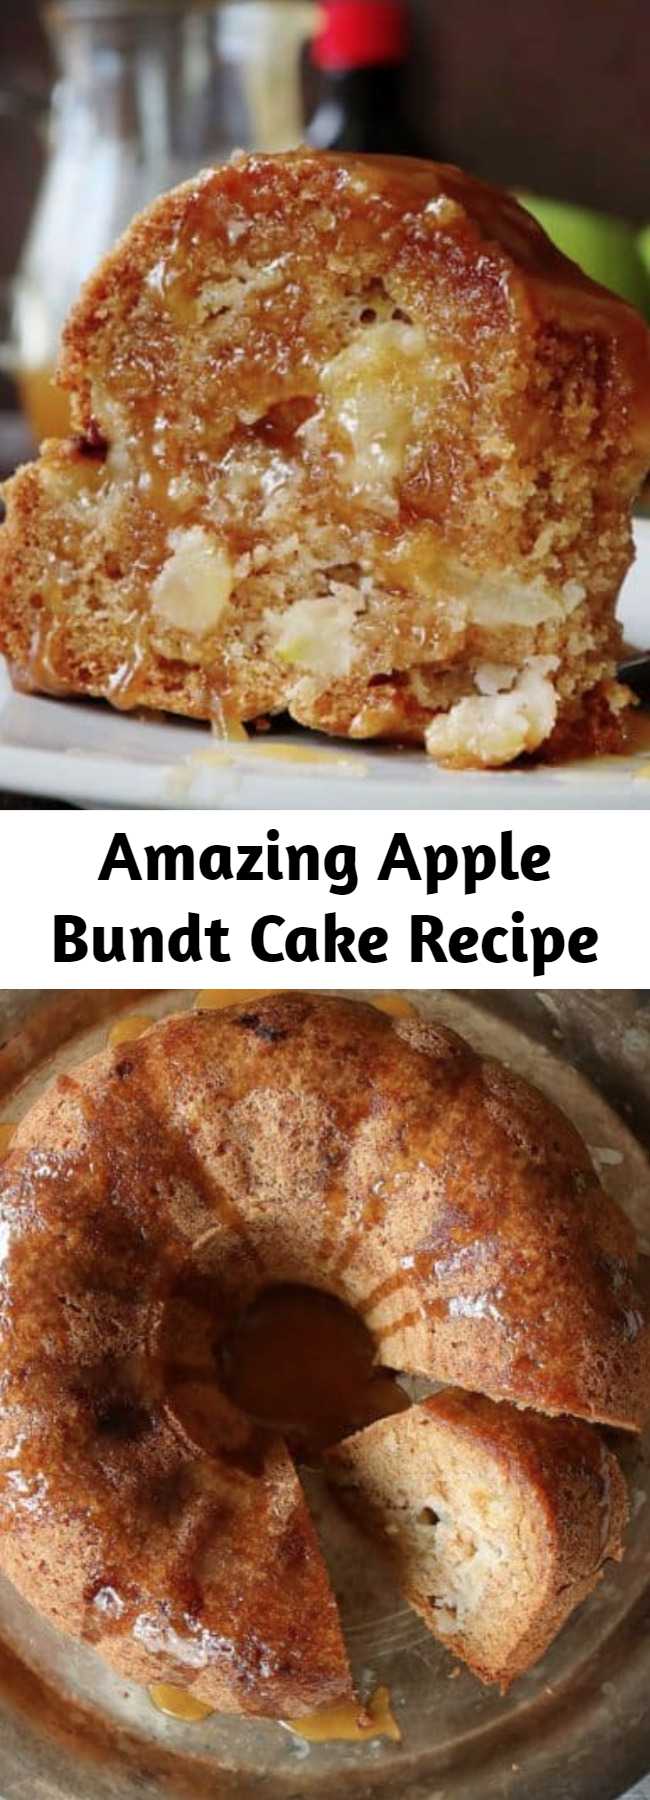 Amazing Apple Bundt Cake Recipe - Seriously amazing Apple Bundt Cake that you will want to make again and again! This recipe has been handed down through the generations and definitely stands the test of time. #applebundtcake #baking #fallbaking #recipes #applecake #apples